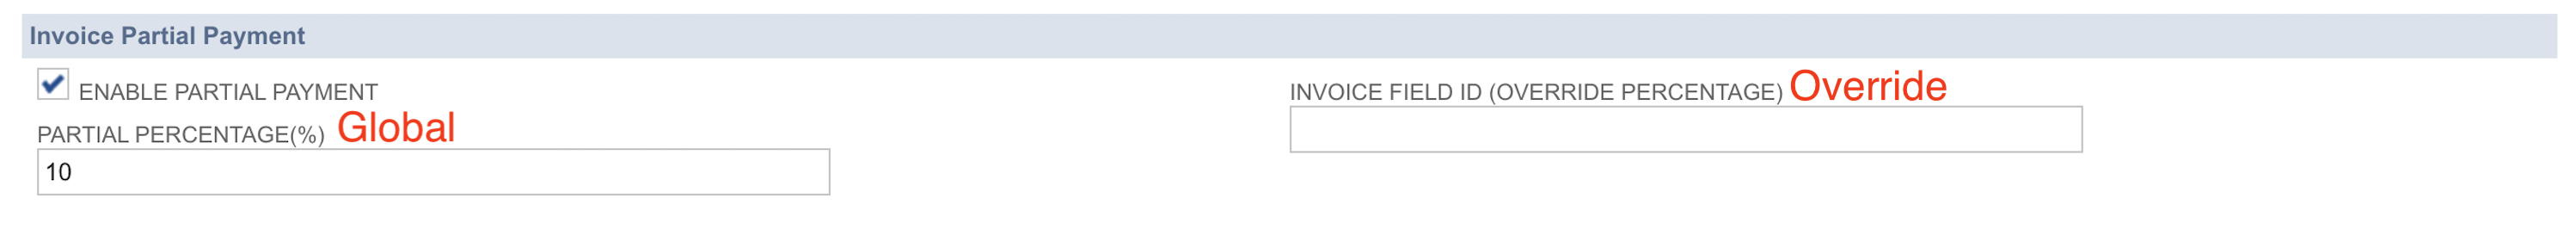 Invoice_Partial_Payment.png